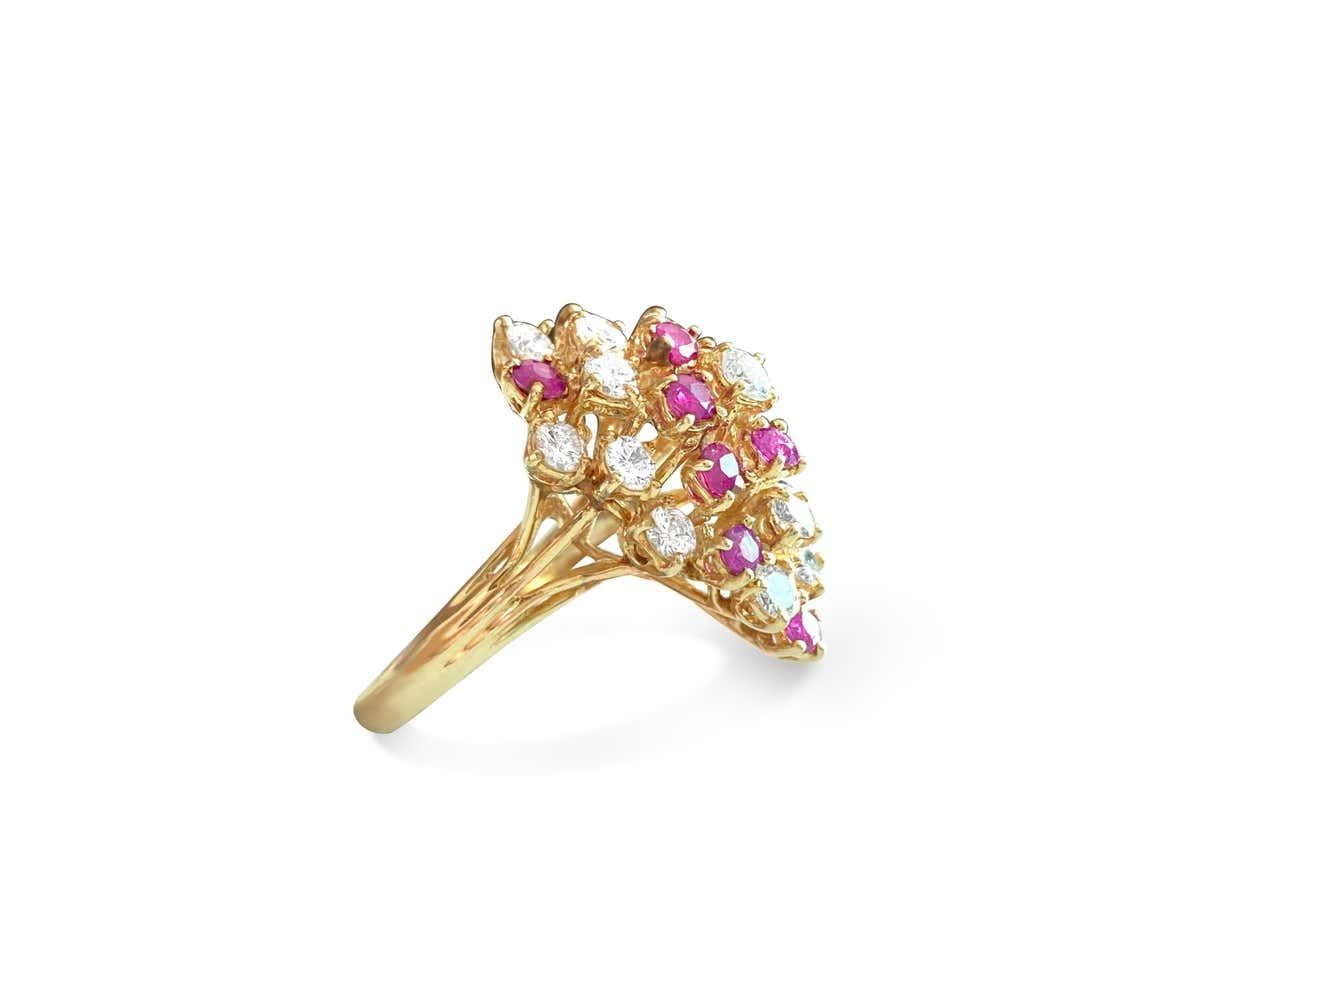 Women's 14k Gold, 3.50 Carat Diamond & Ruby Cocktail Ring For Sale